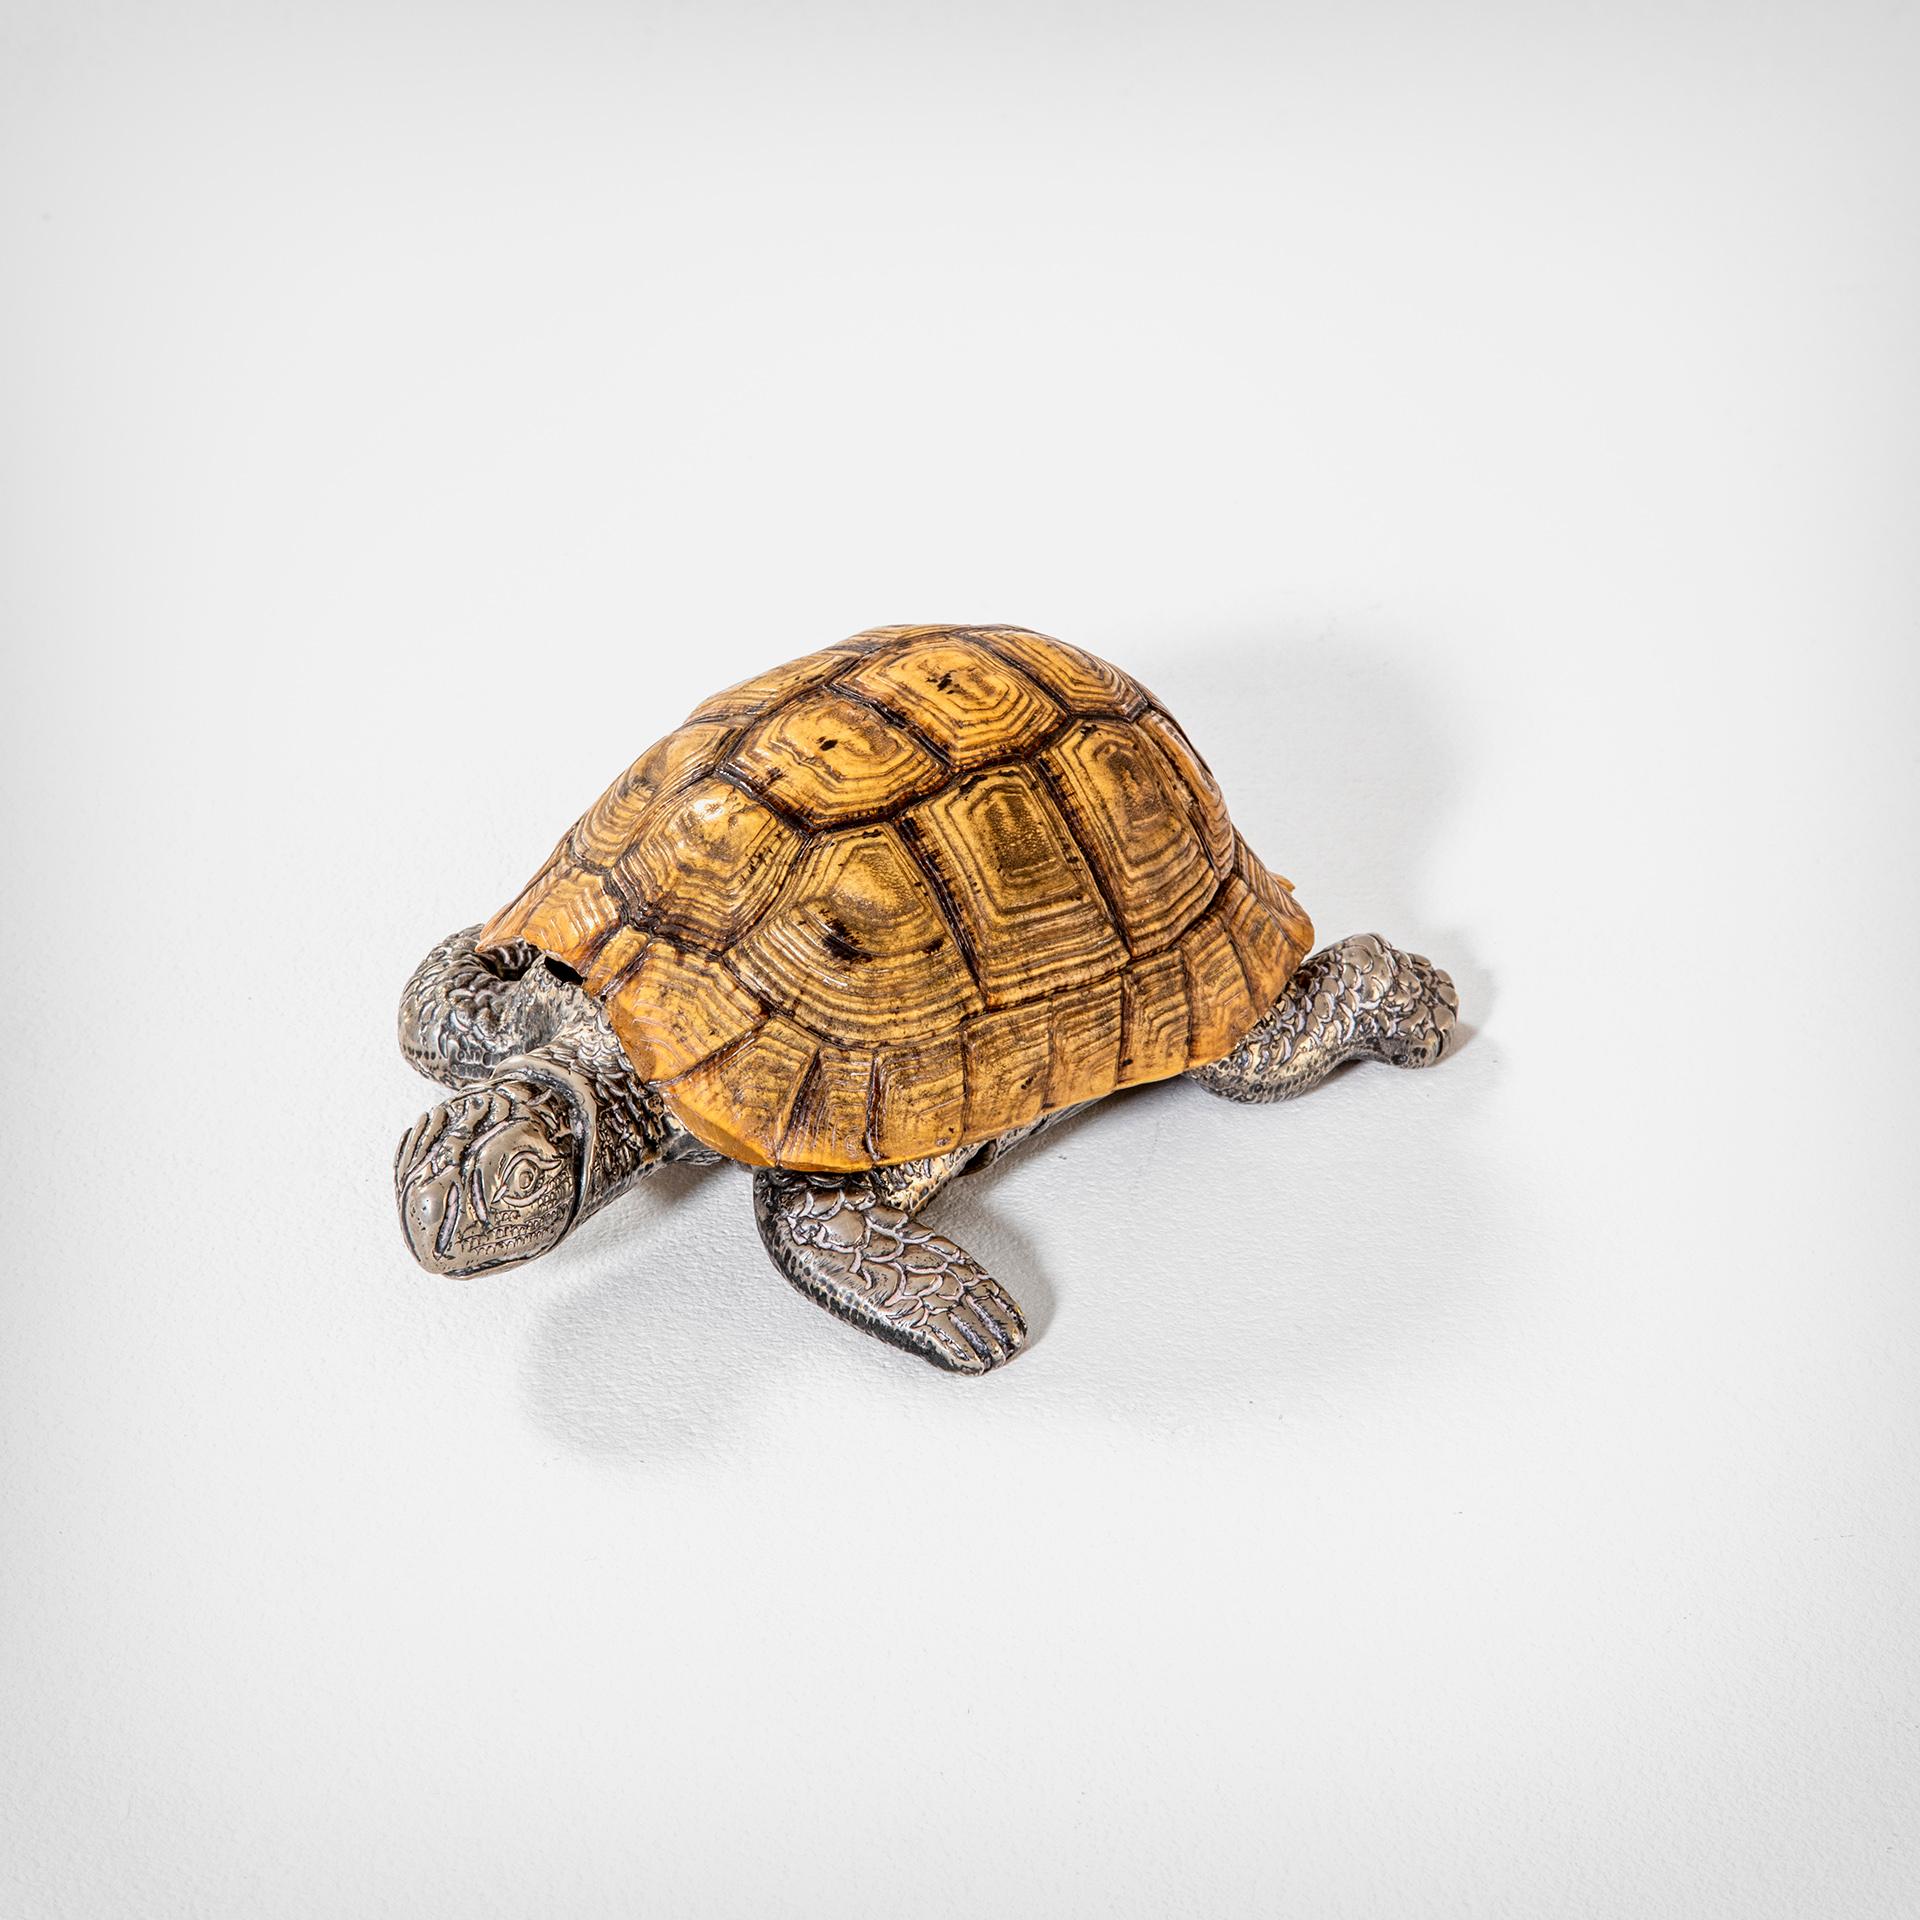 Very realistic Turtle designed by Gabriella Crespi in '70s. The turtle has the structure in Silvered Metal, the shell could be opened and inside you can put some jewelry or little object. Perfect fos gift or for the entrance or even as Desk